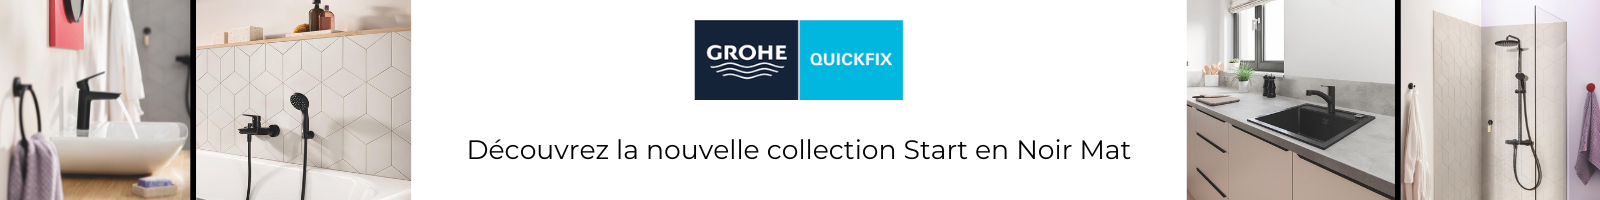 Robinet COLLECTION GROHE NOIR MAT